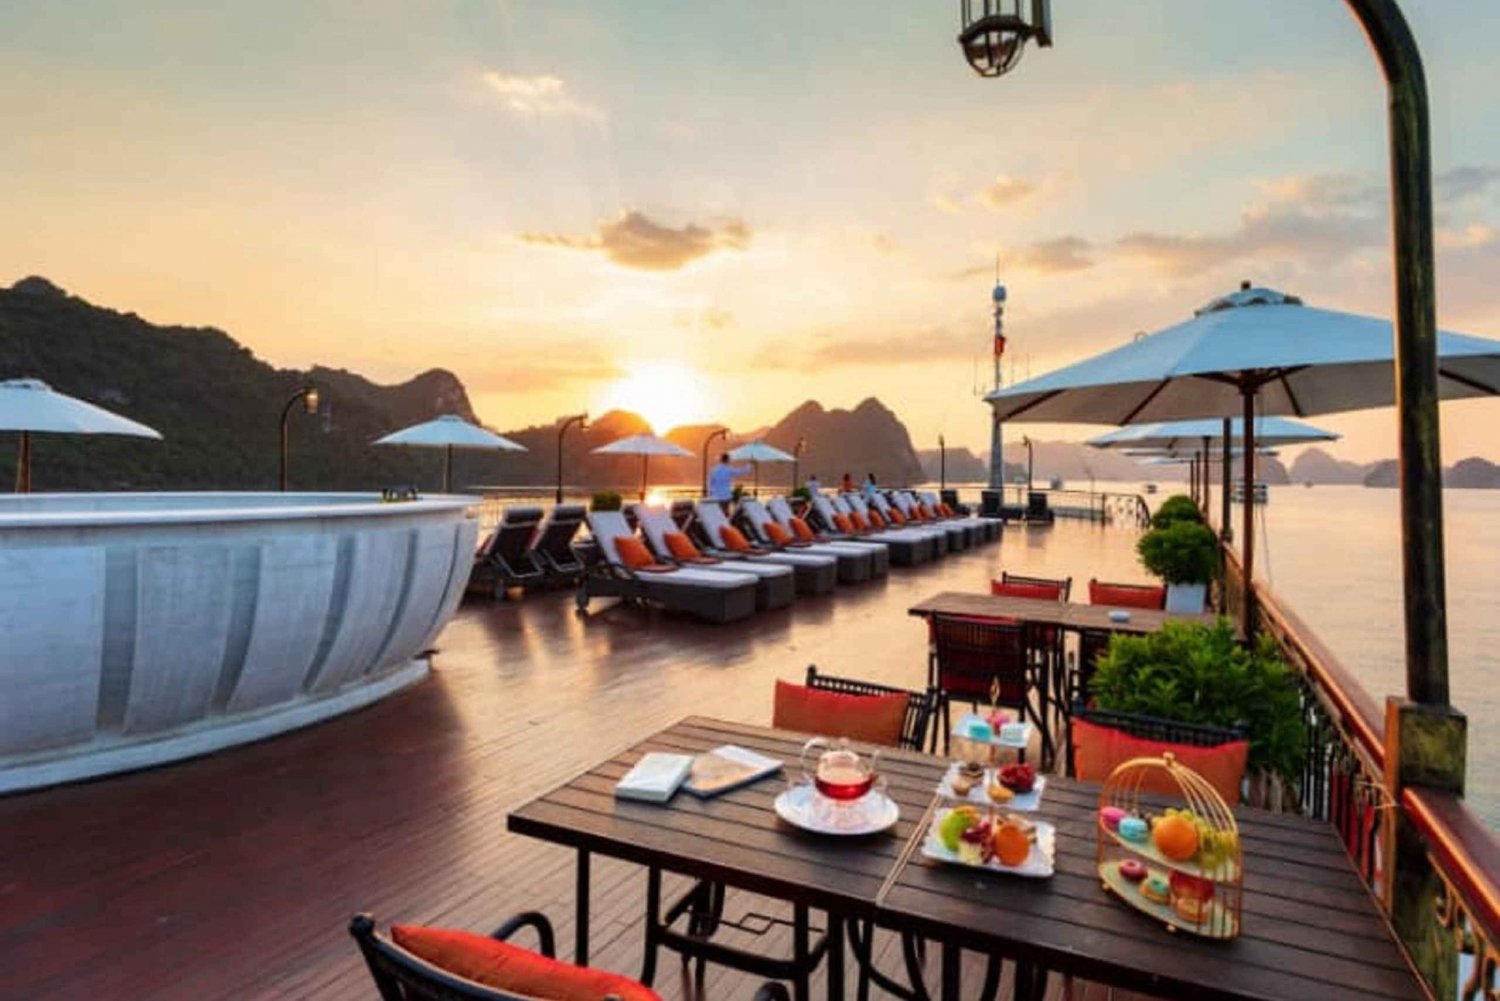 From Hanoi: 3-Day Halong & Lan Ha Bay Cruise with Cave Tour